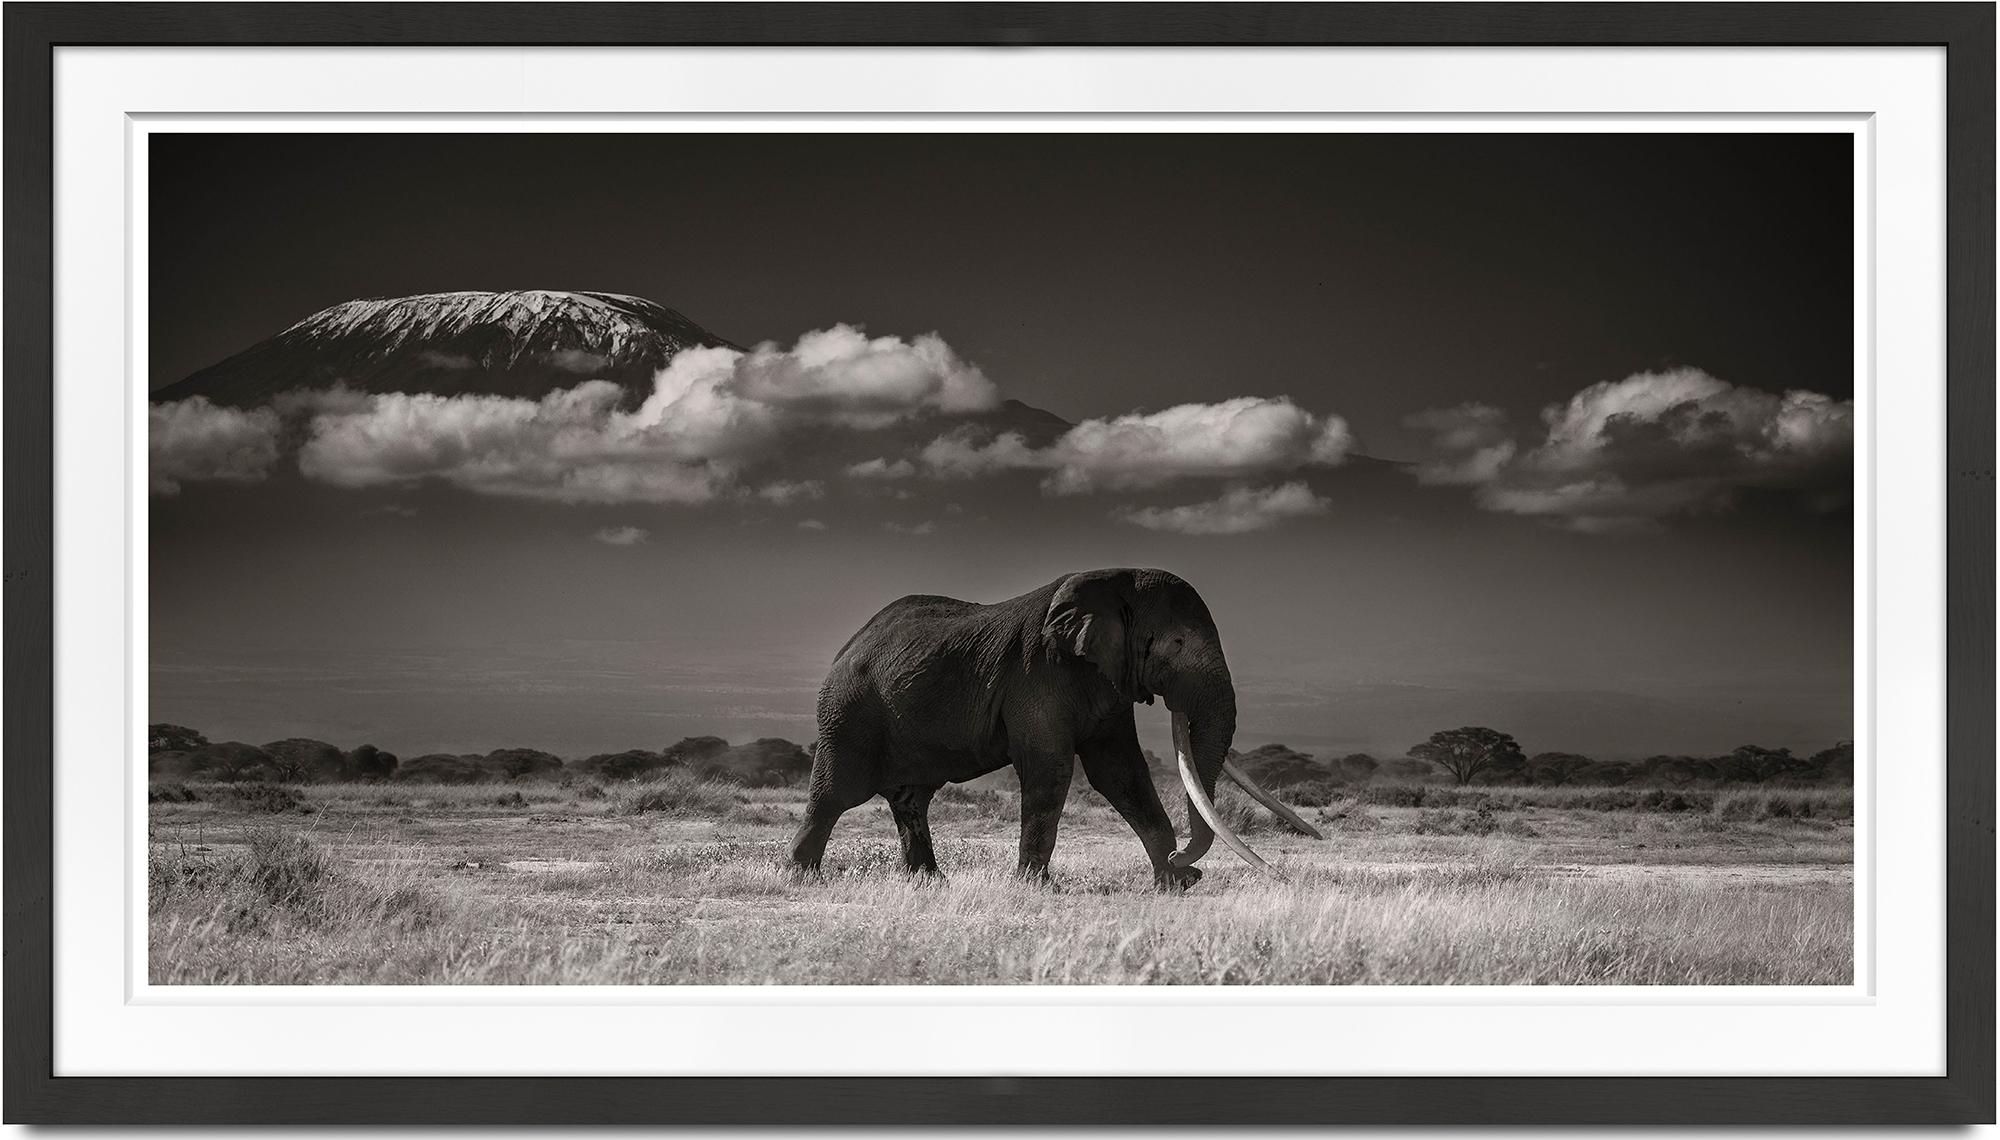 Tim in front of Kilimanjaro, animal, wildlife, black and white photography - Photograph by Joachim Schmeisser